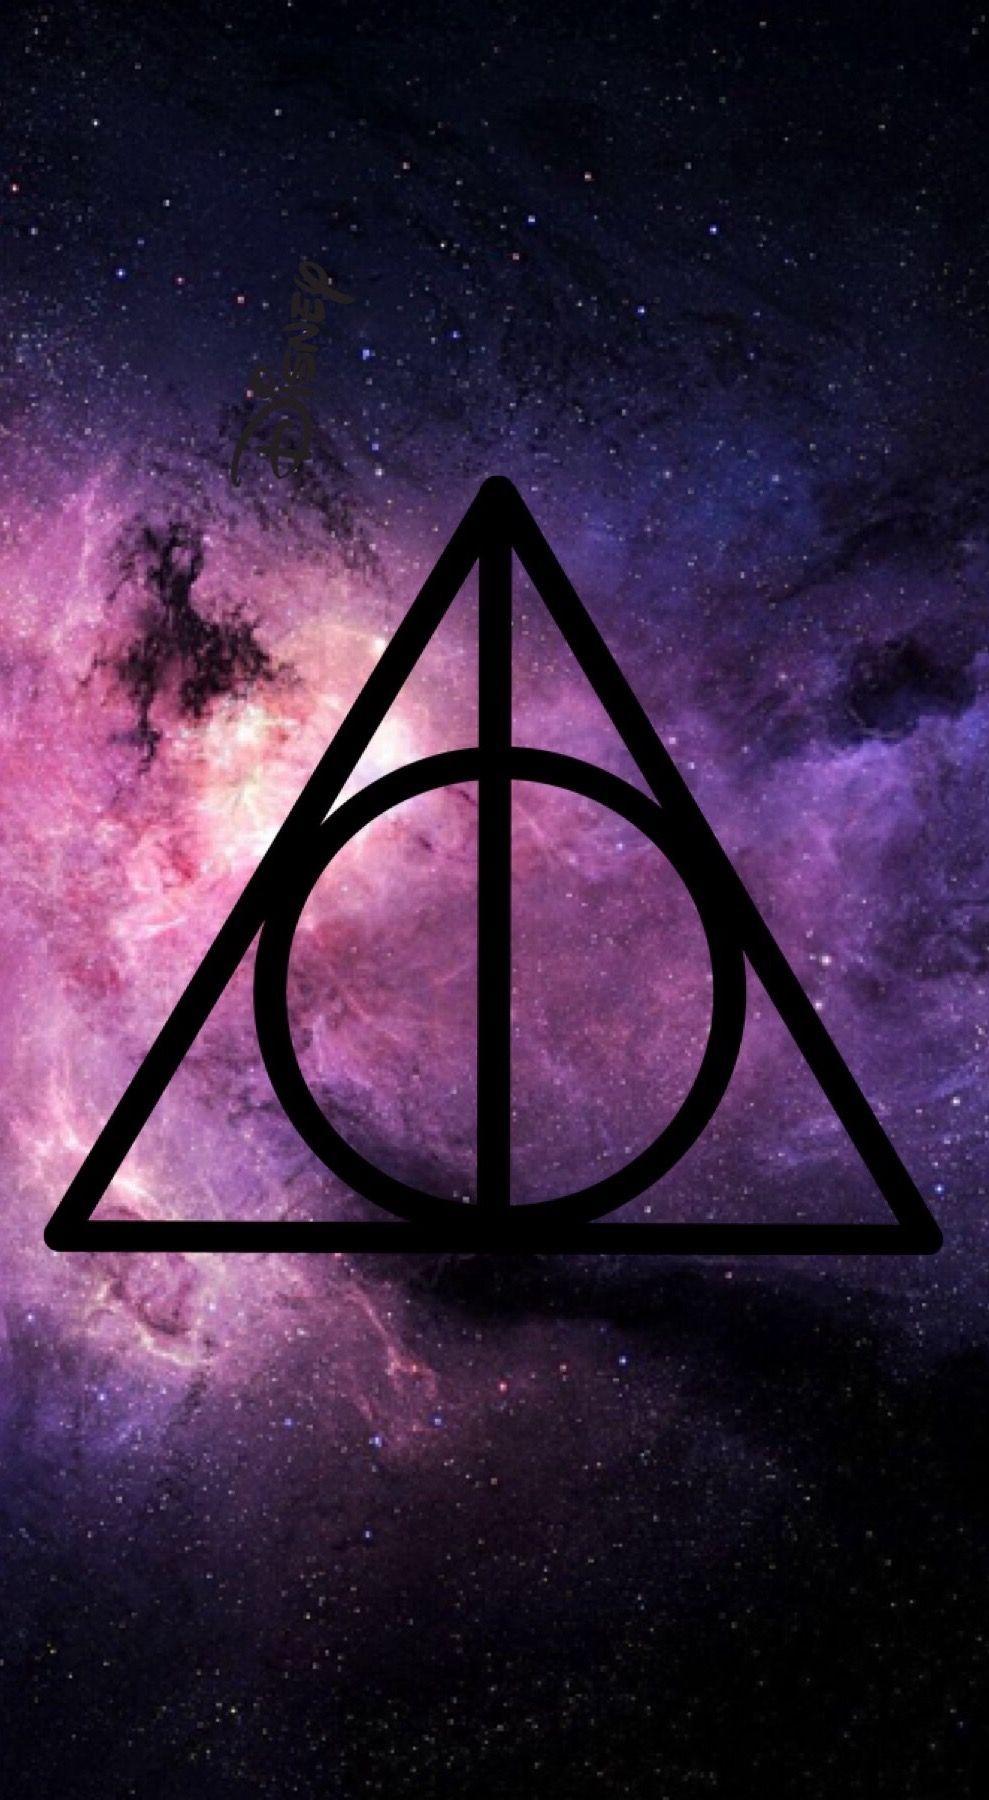 The Deathly Hallows symbol (Harry Potter).. phone wallpaper. My